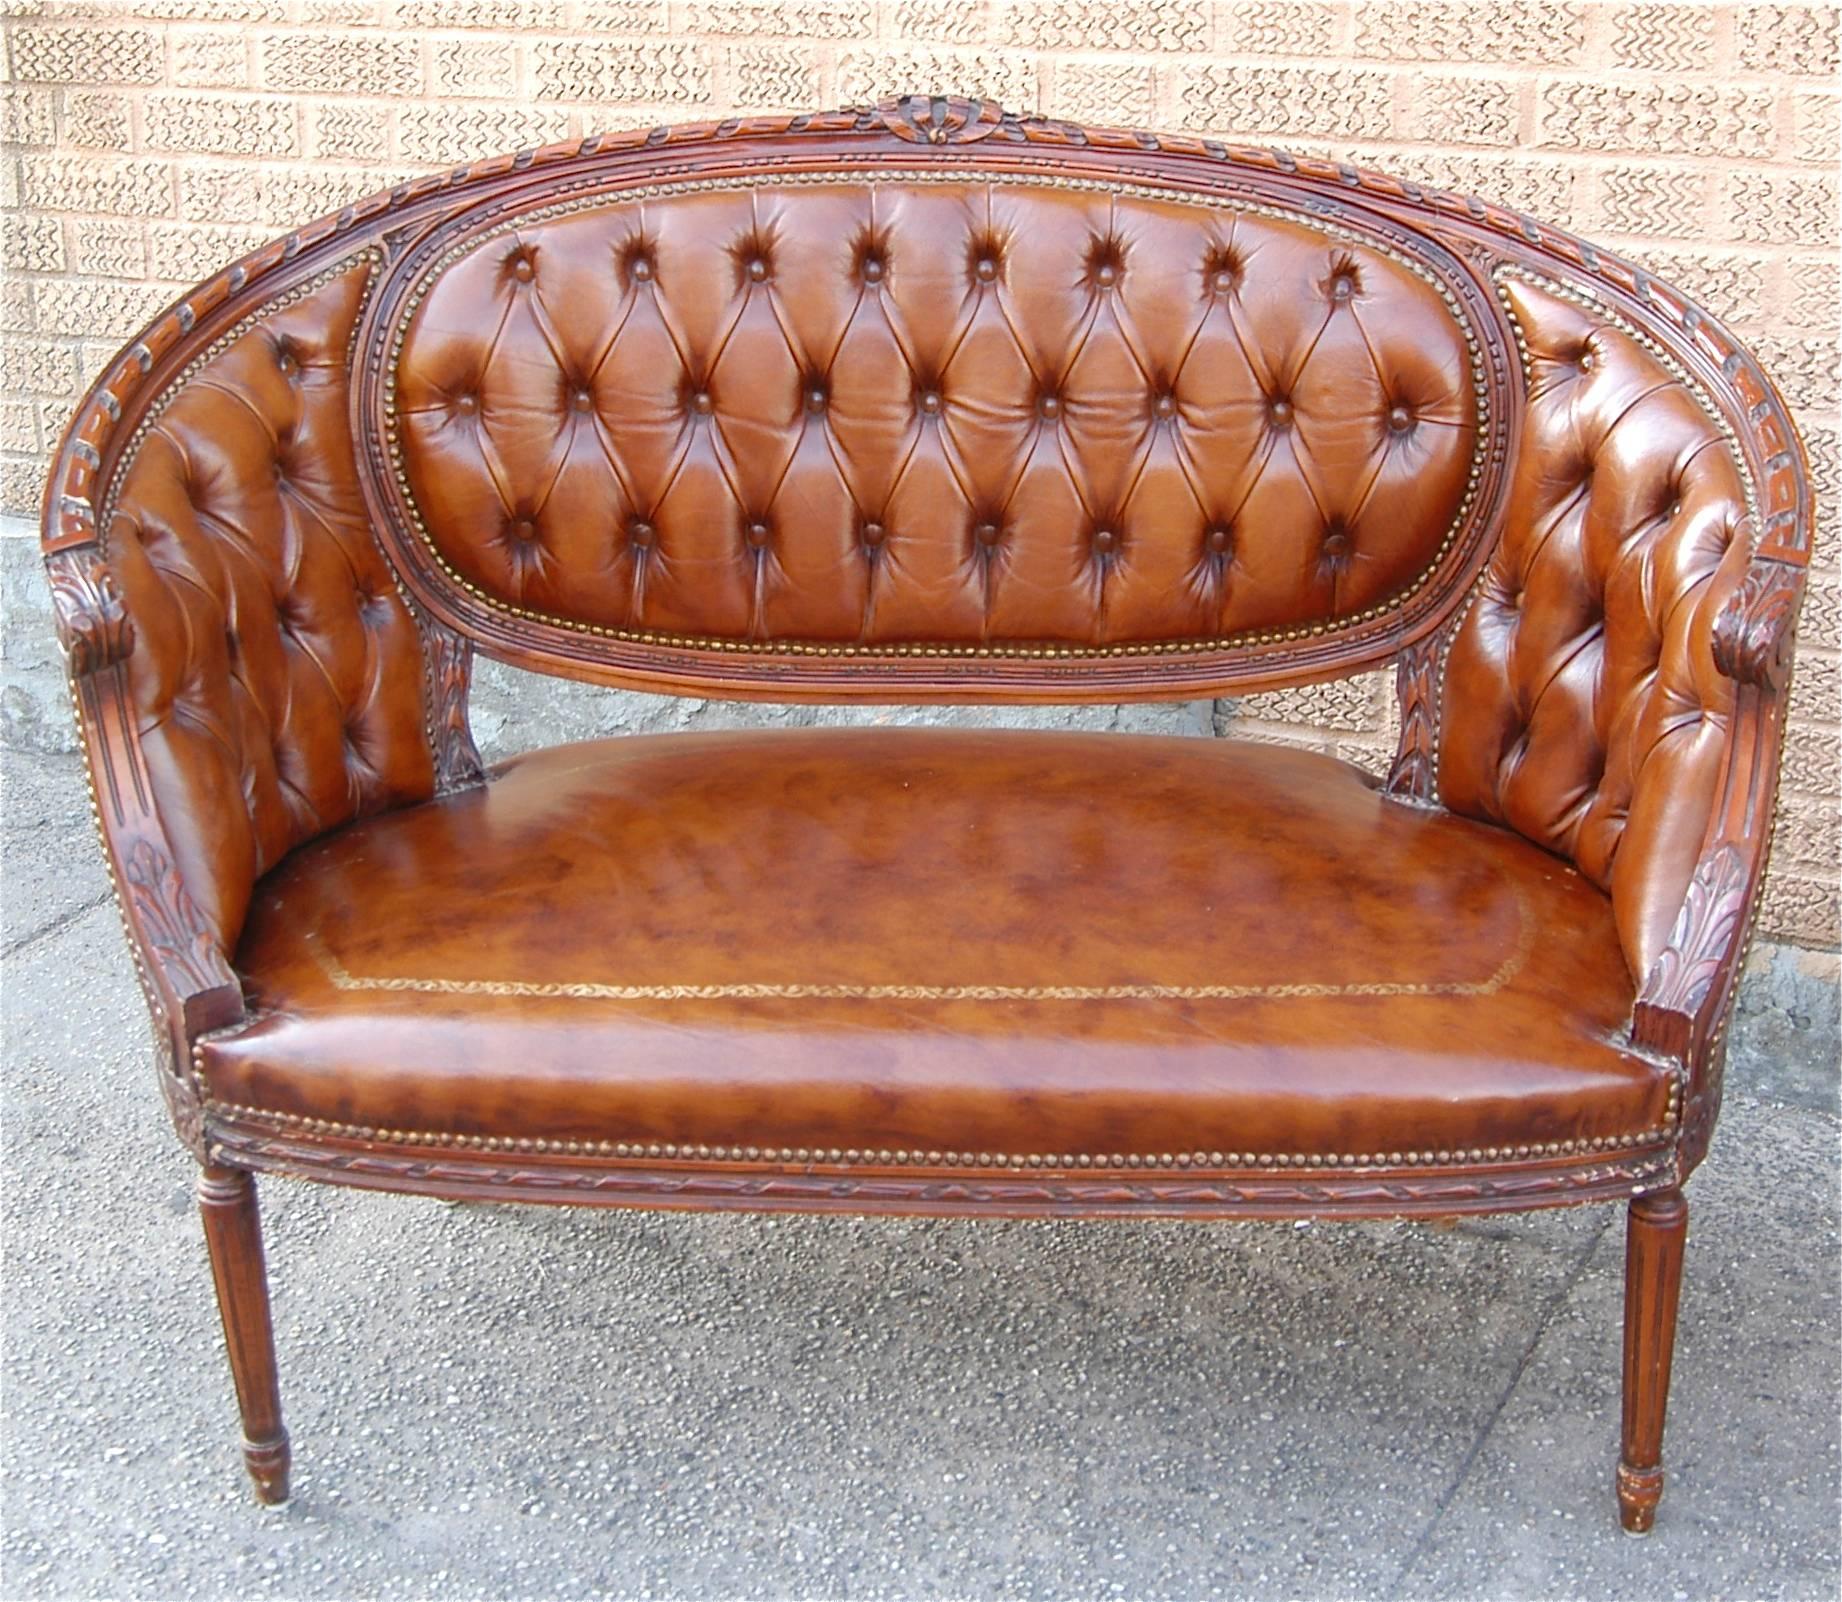 Pair of Italian, leather tufted, settees / canapés / loveseats with intricately carved wood frames and nailhead trim, circa 1970s, marked made in Italy.